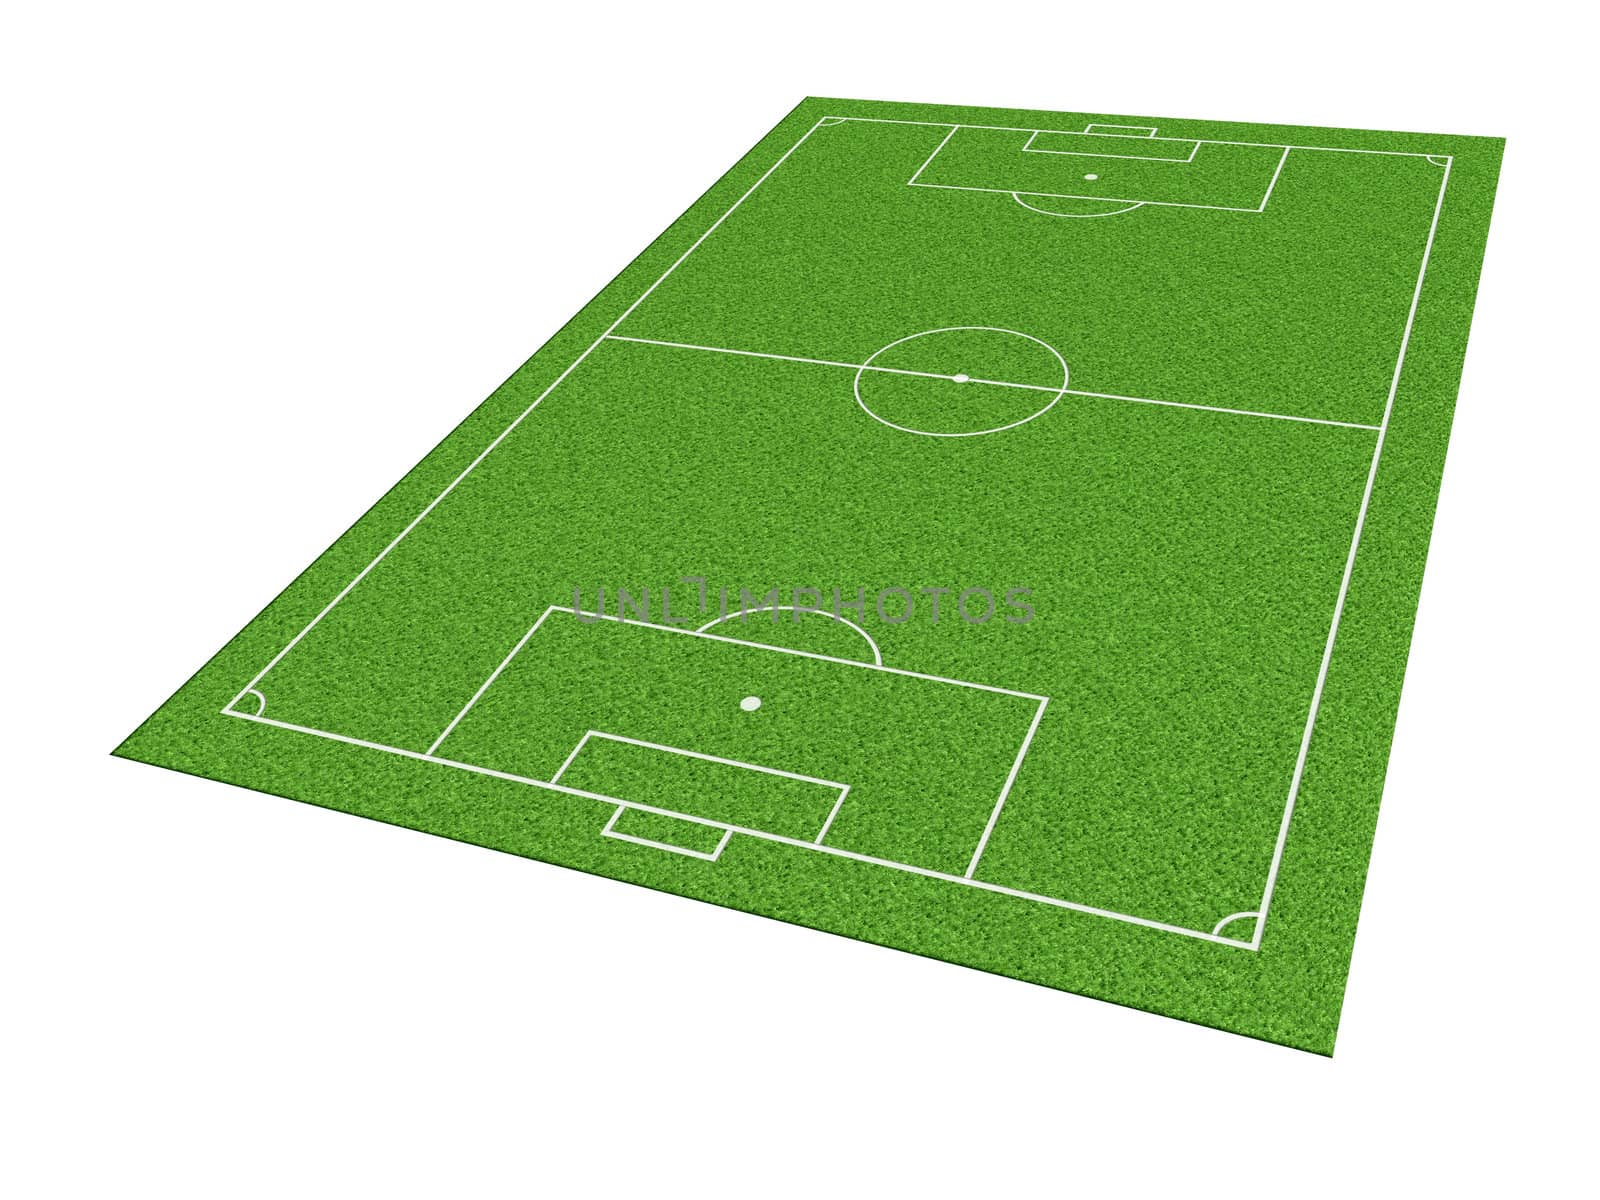 Soccer or football field isolate on white background by jakgree